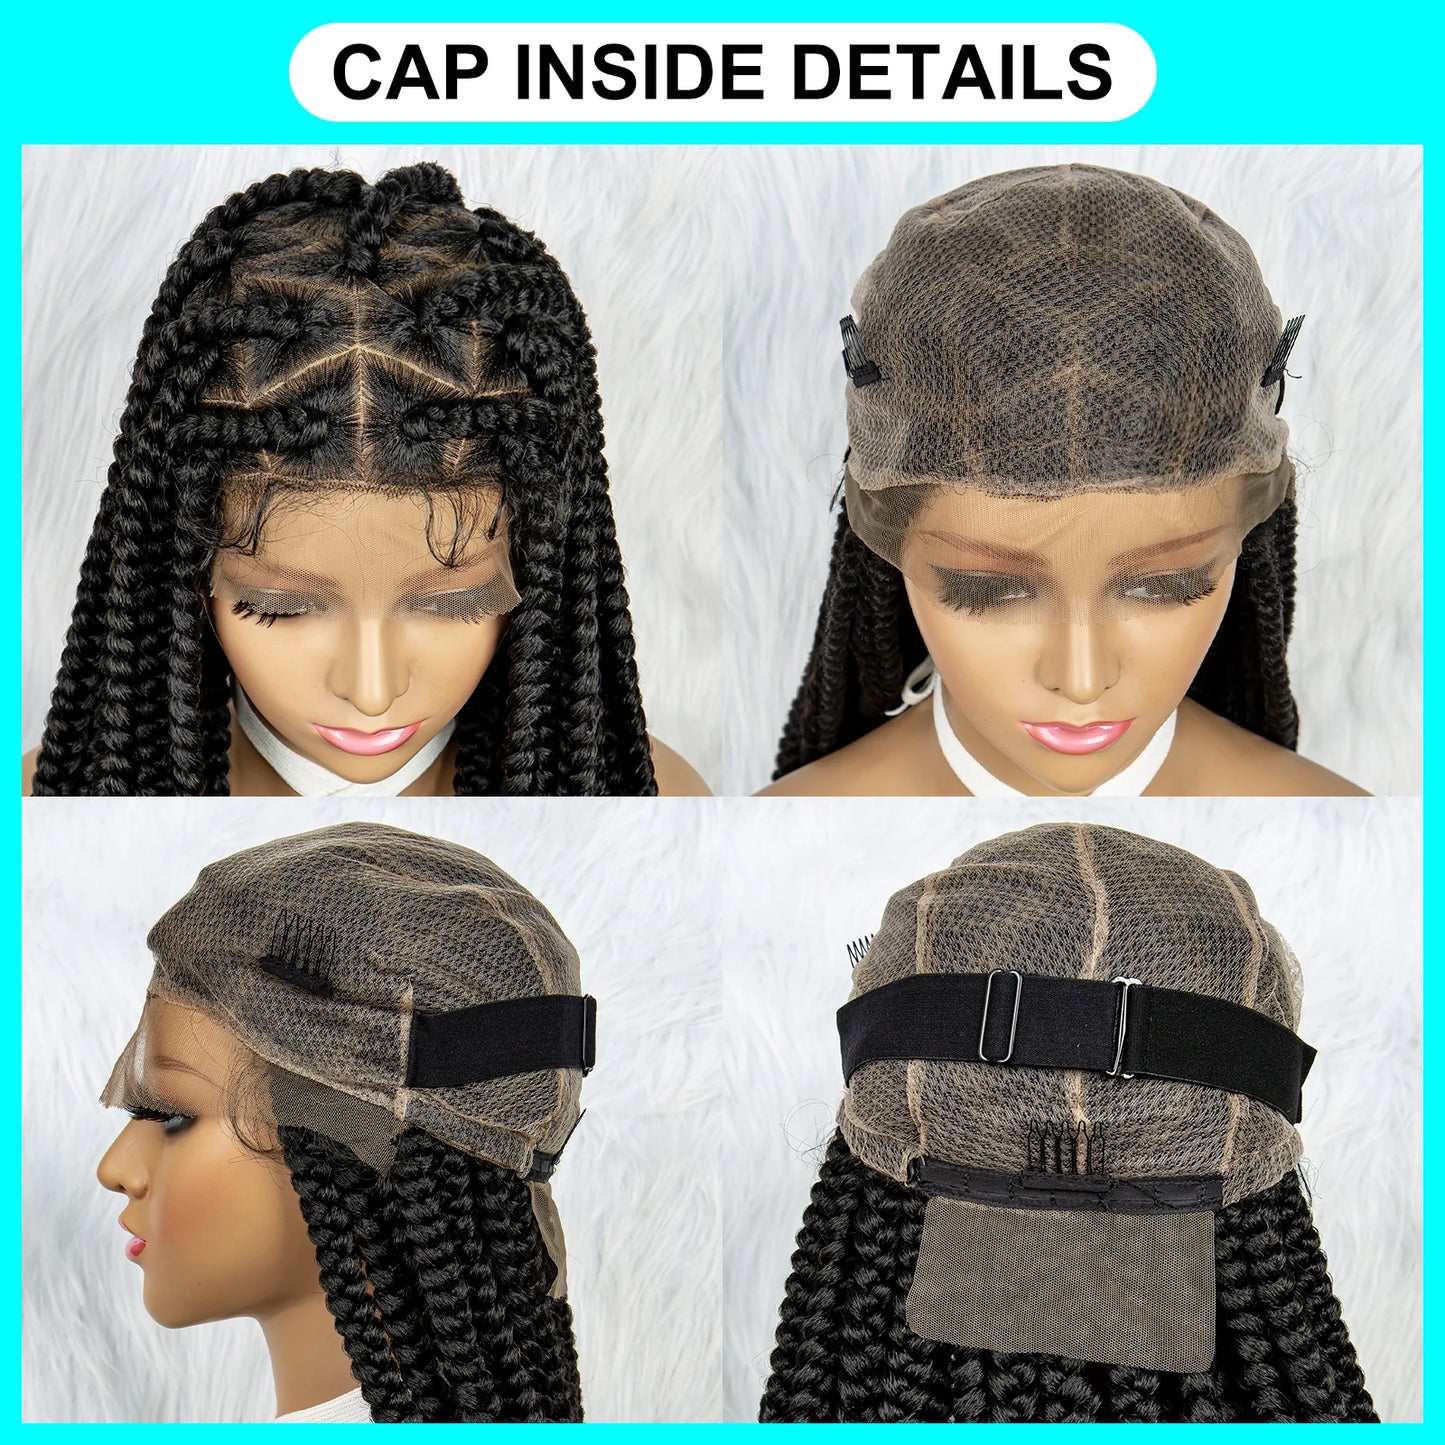 Full Lace Cornrow Braided Wigs, Synthetic Lace Front Wig Big Knotless Box Braided Wigs